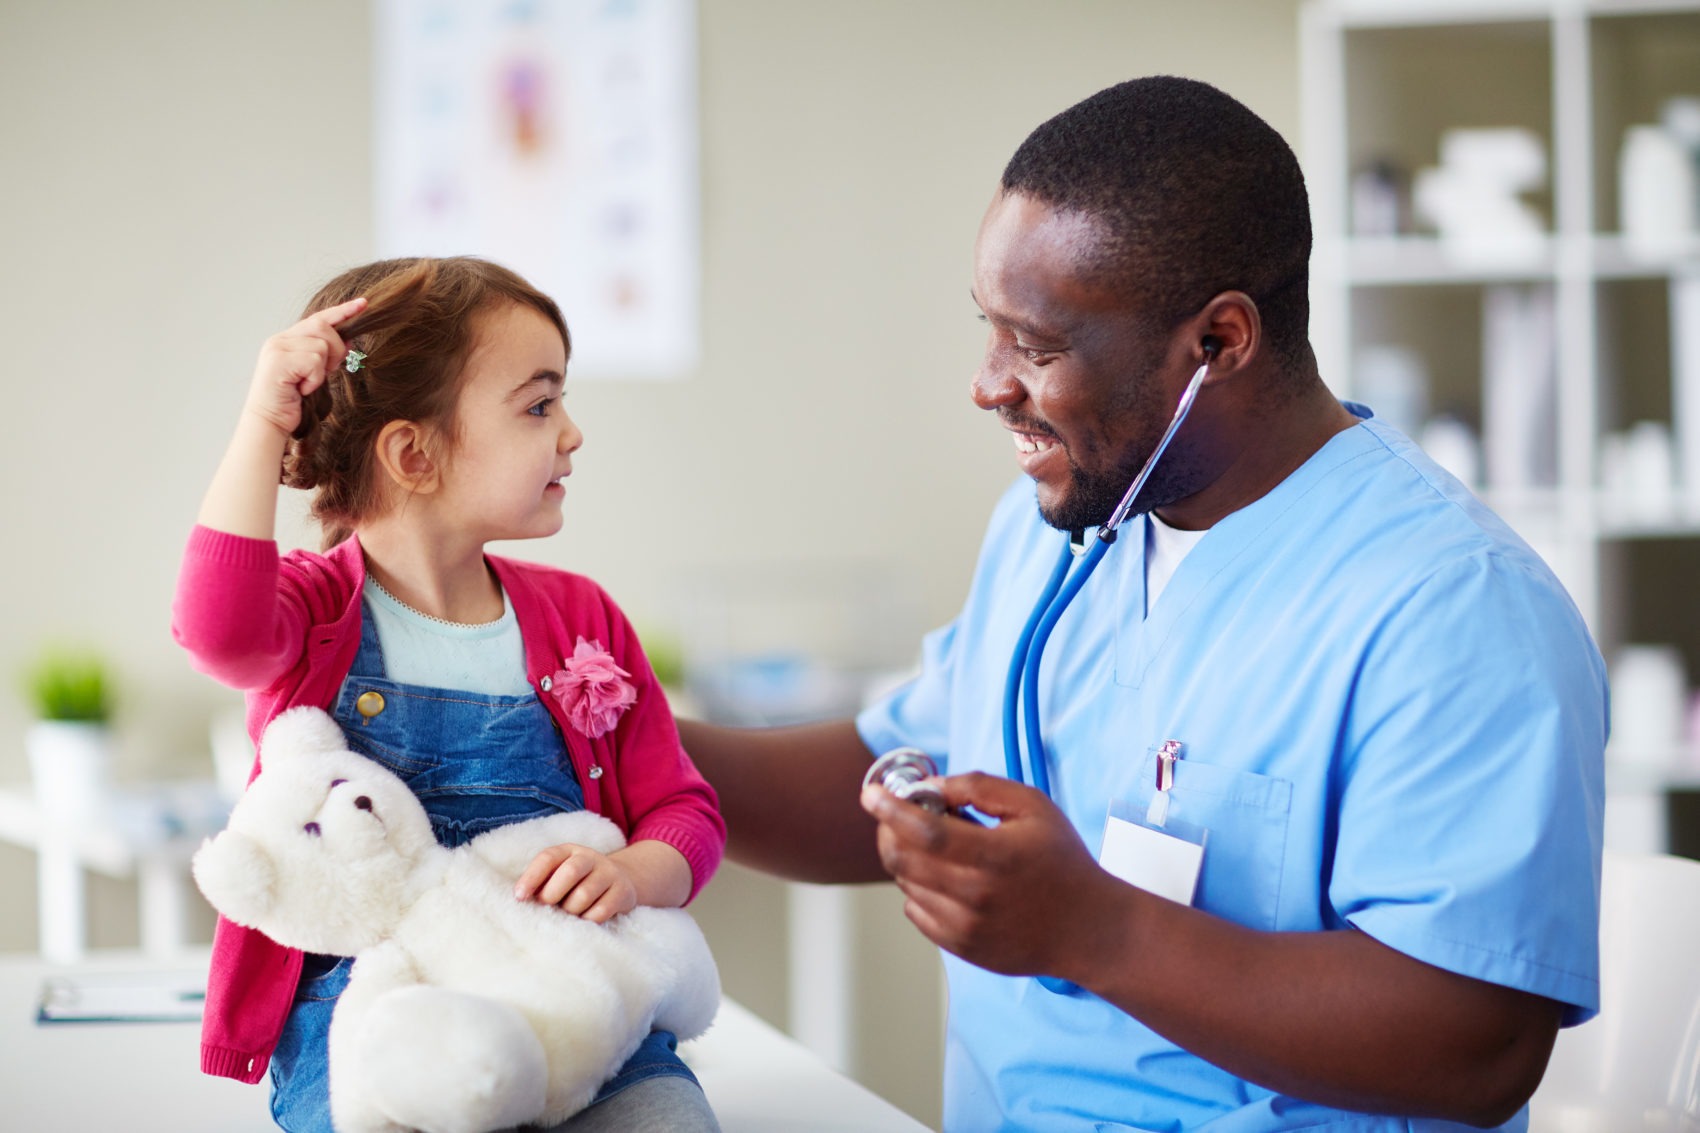 Child with Medical Assistant